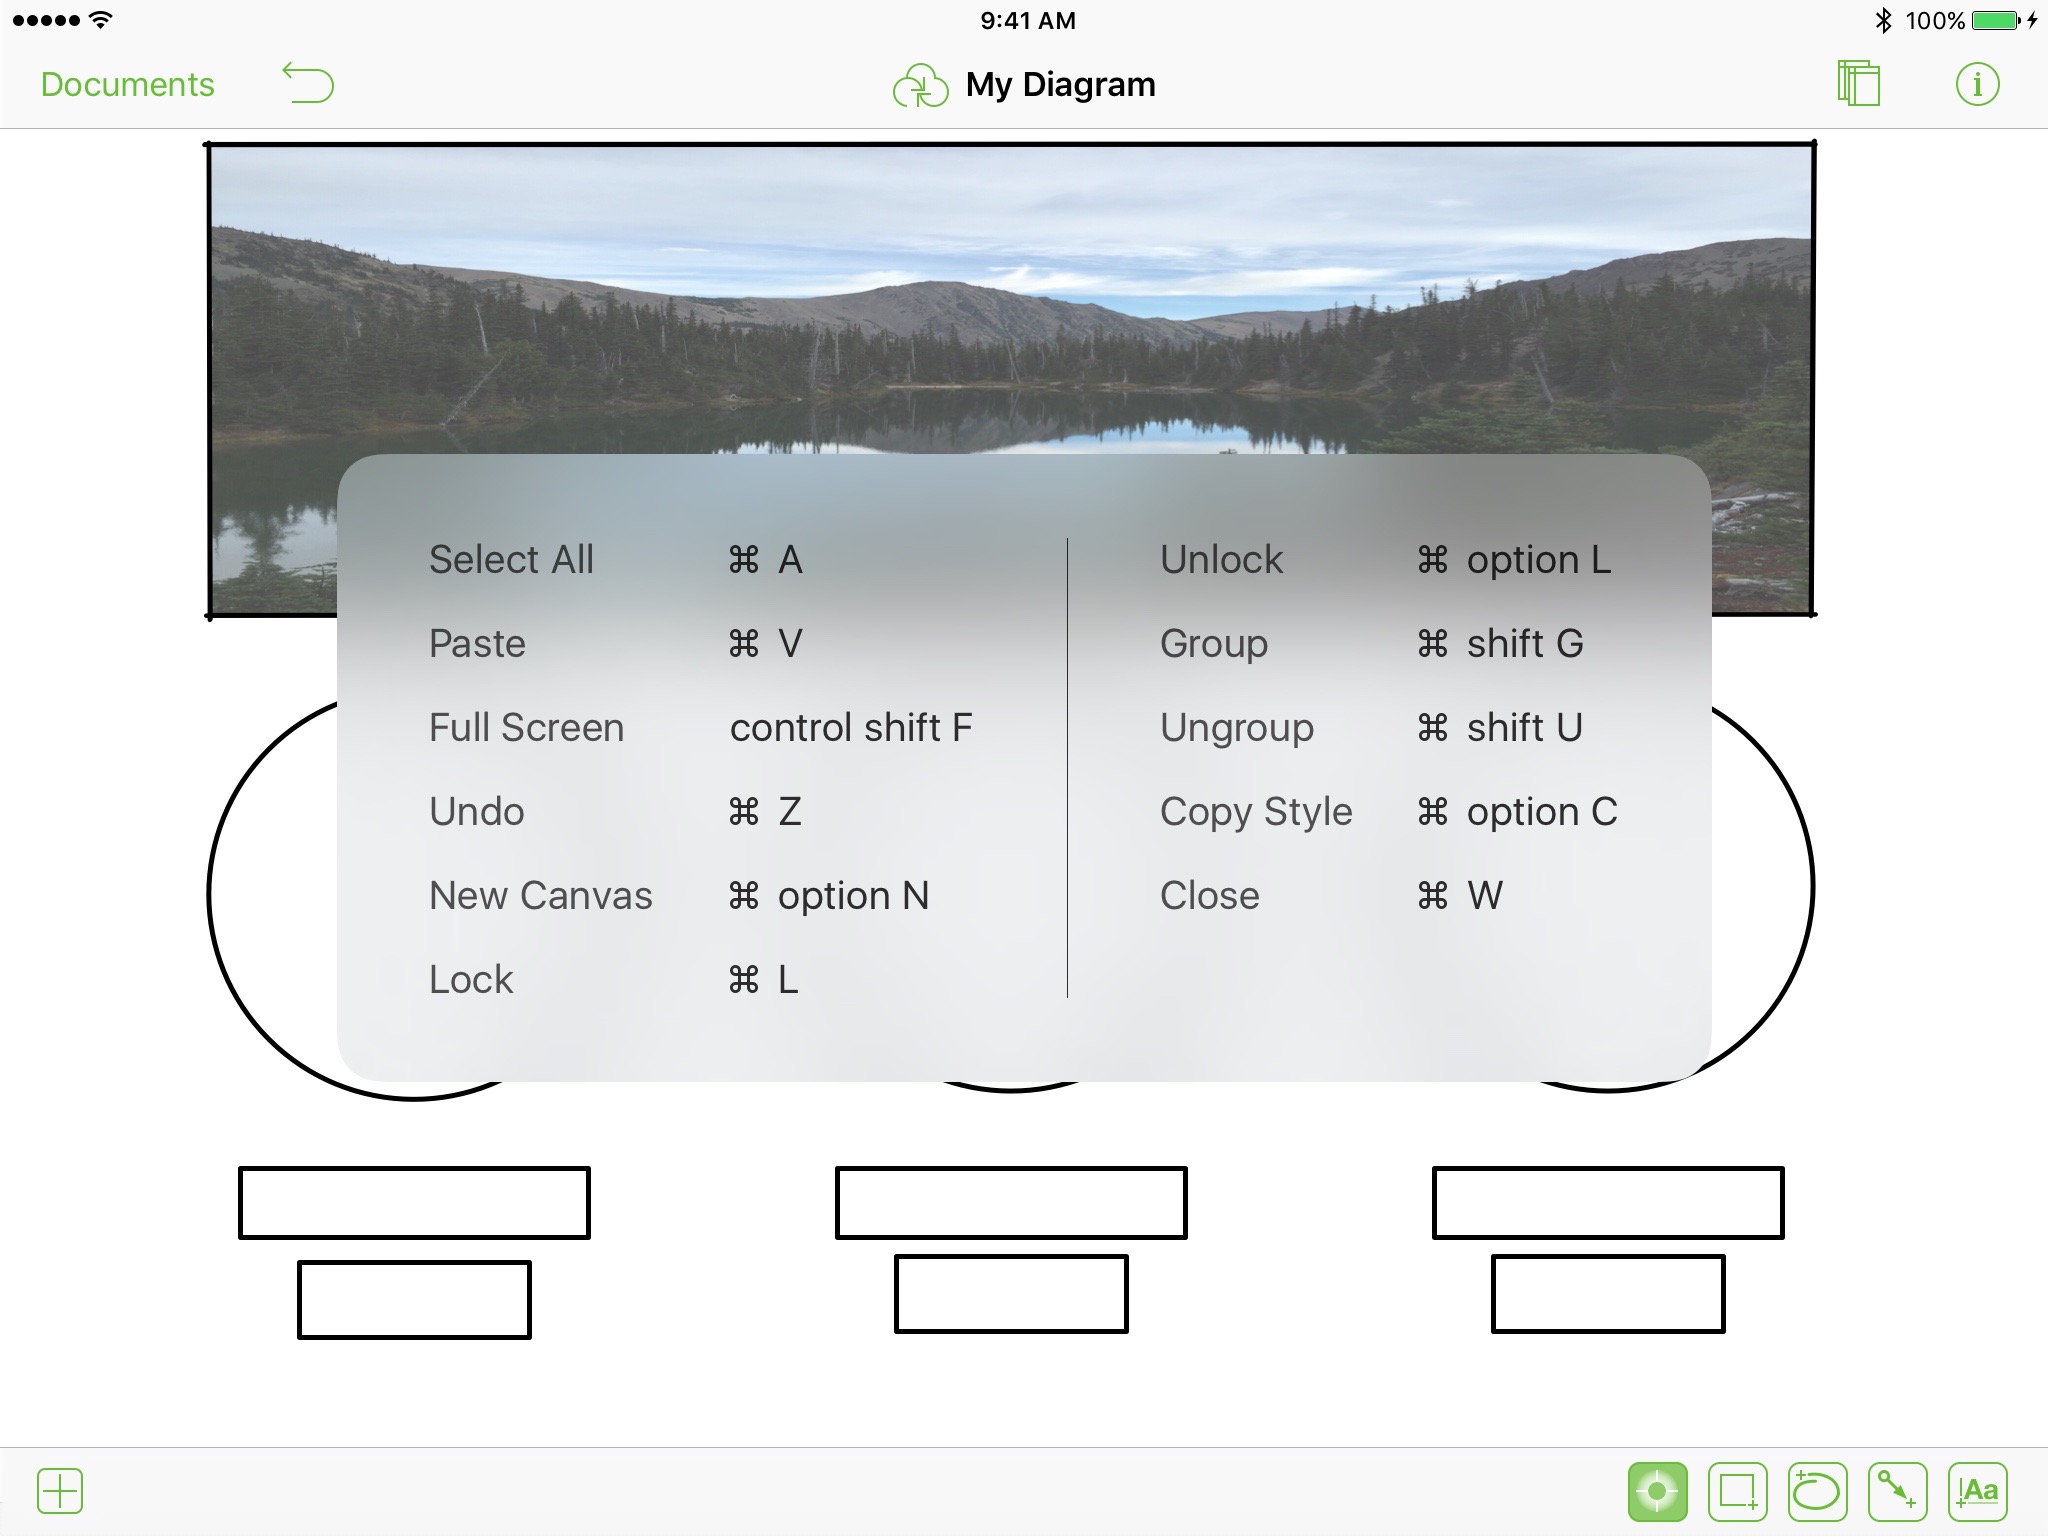 Hardware keyboard support popup in OmniGraffle on an iPad Pro